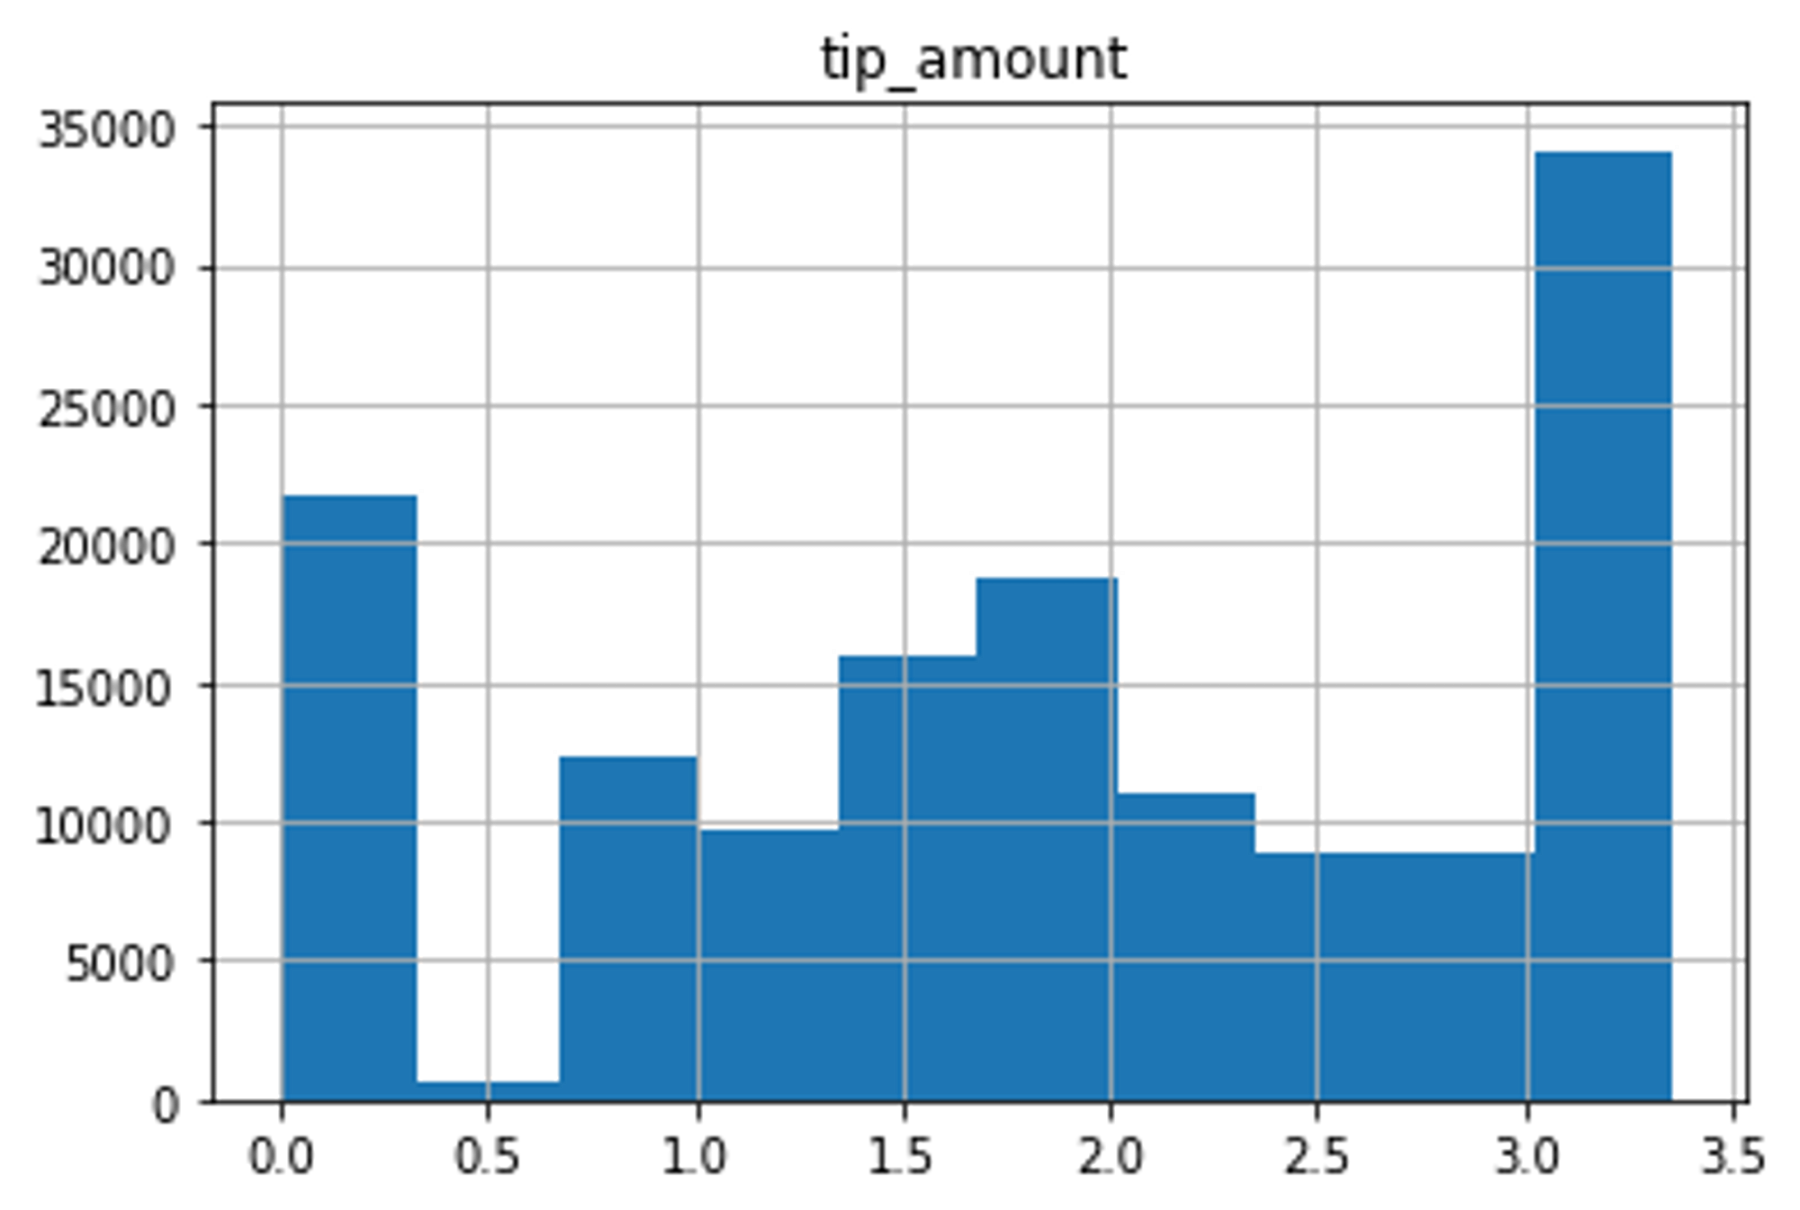 Histogram of the tip amount target variable